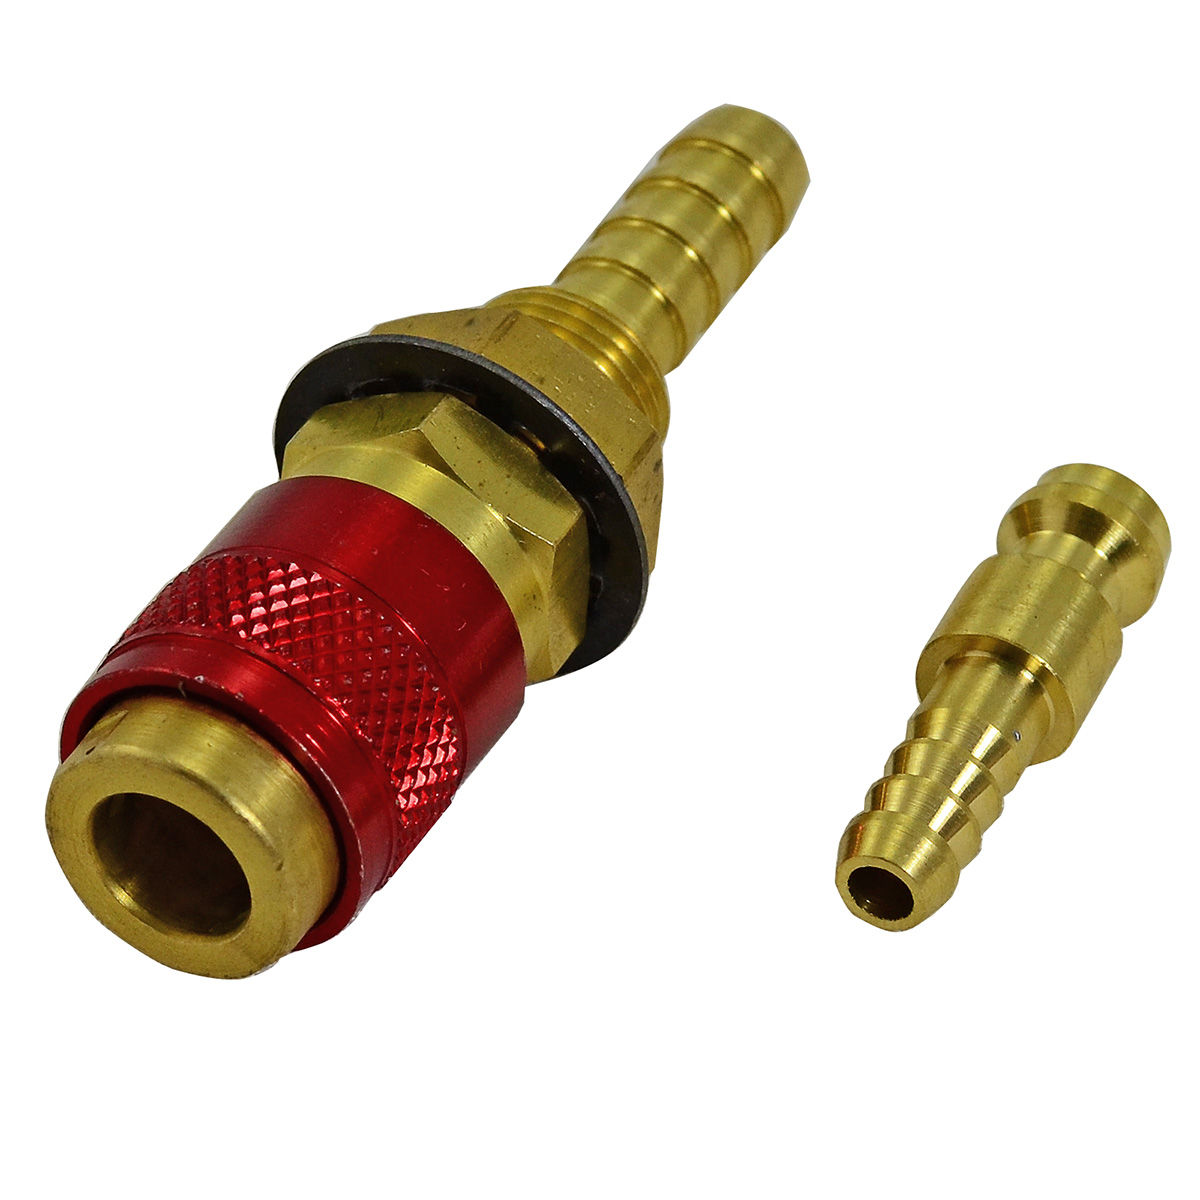 TIG Welding Torch Fitting Connector Adapter (M12x1.0 Change M16x1.5)